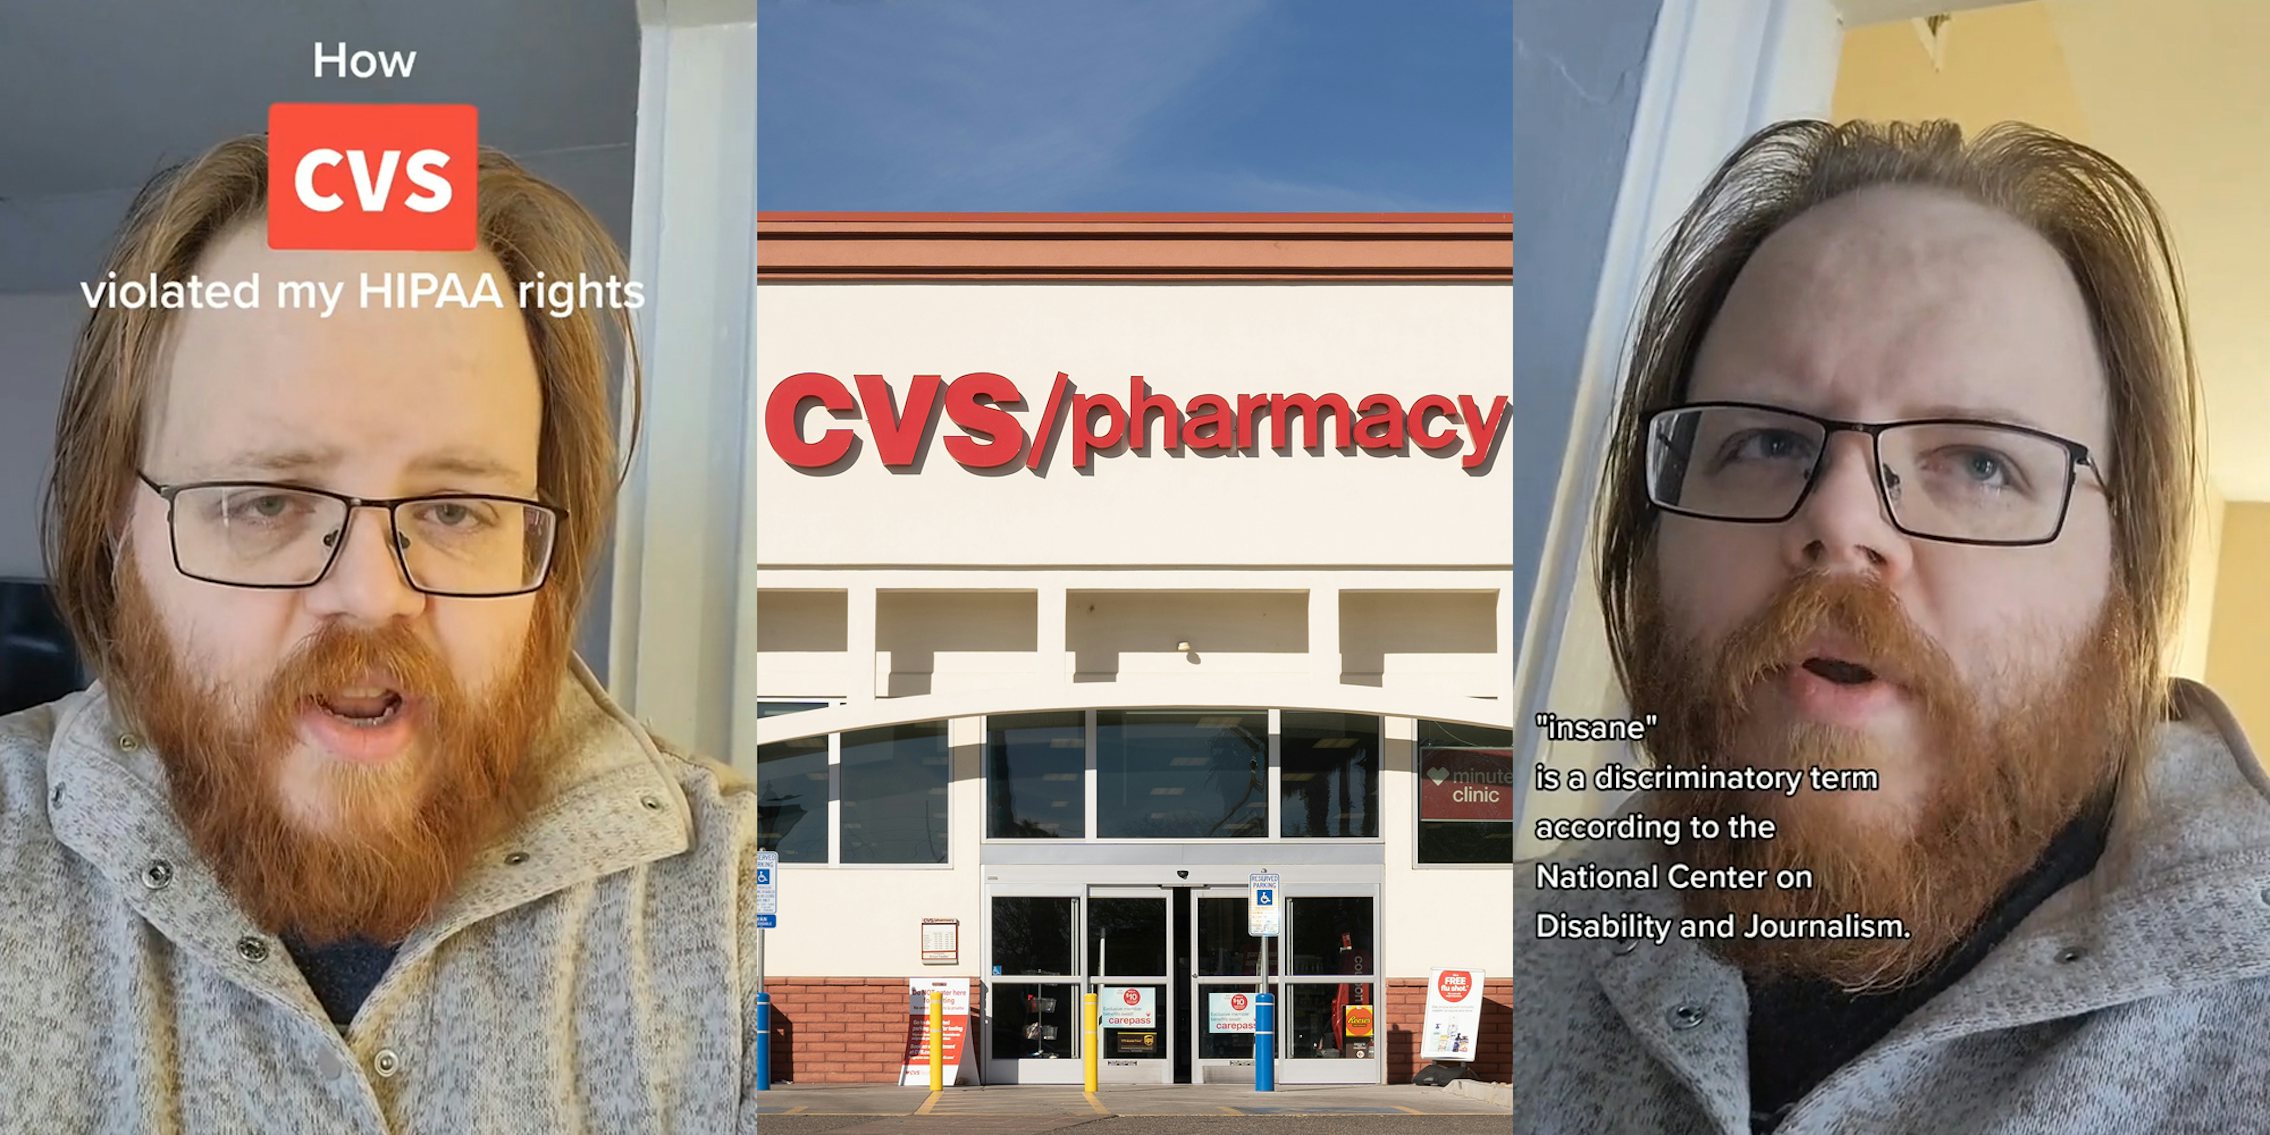 man speaking with caption 'How CVS violated my HIPAA rights' (l) CVS store with sign and sky (c) man speaking with caption ''insane' is a discriminatory term according to the National Center on Disability and Journalism' (r)